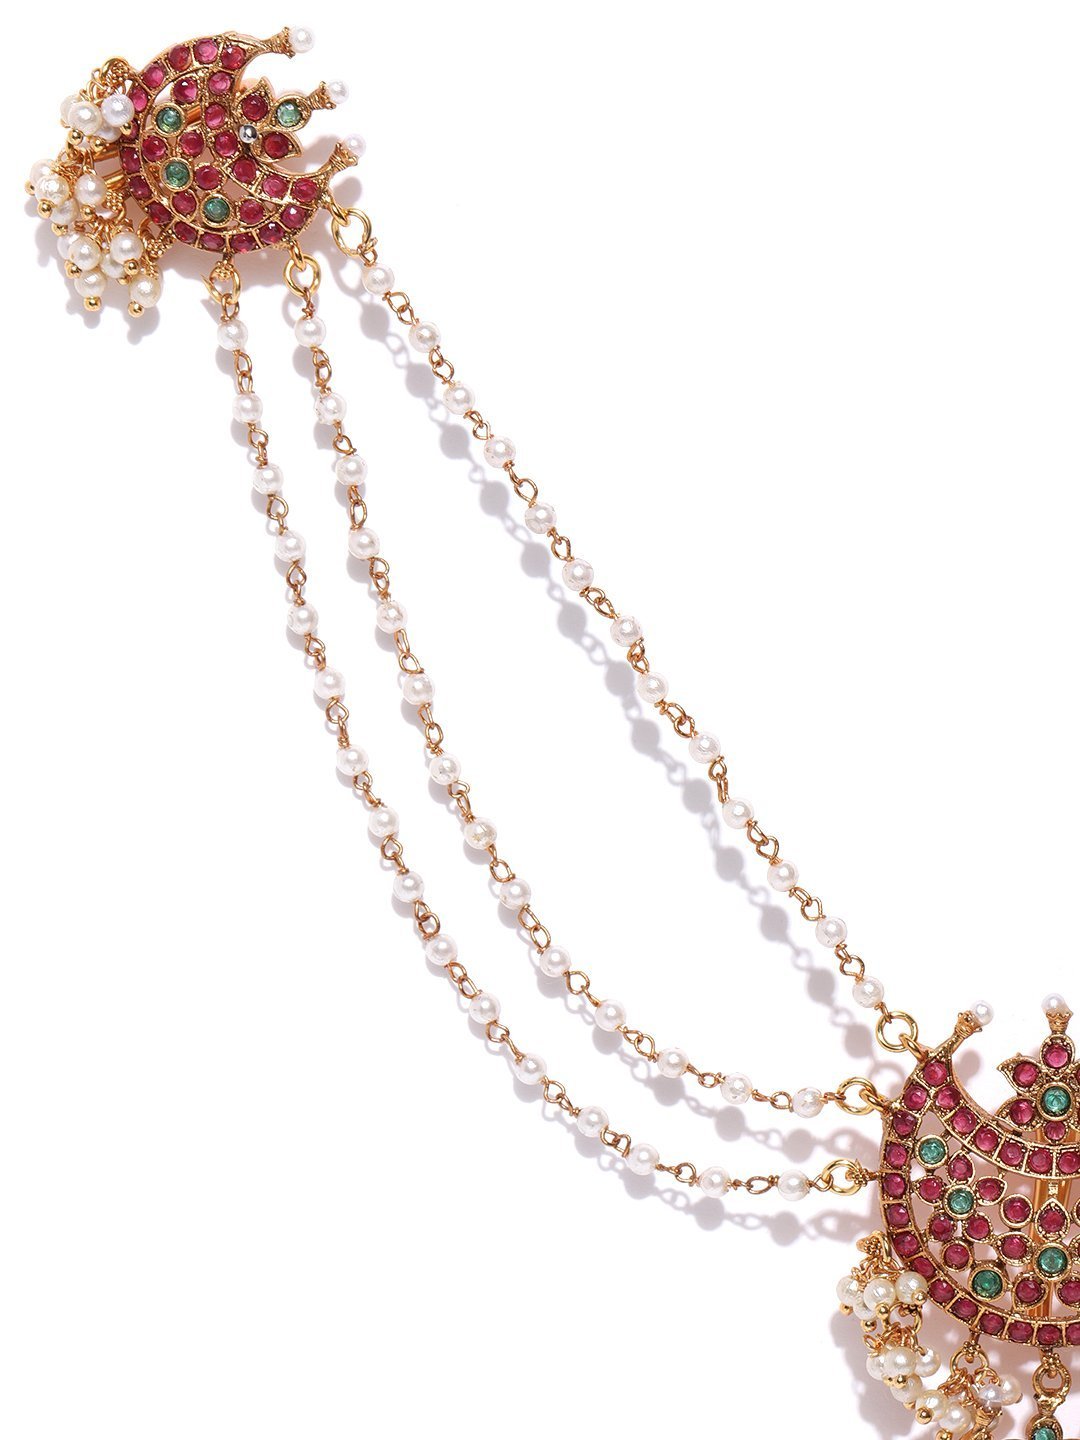 Women's Gold Plated Maroon And Green Stone Studded Multistranded Beaded Chains Bun/ Haiir Accessories - Priyaasi